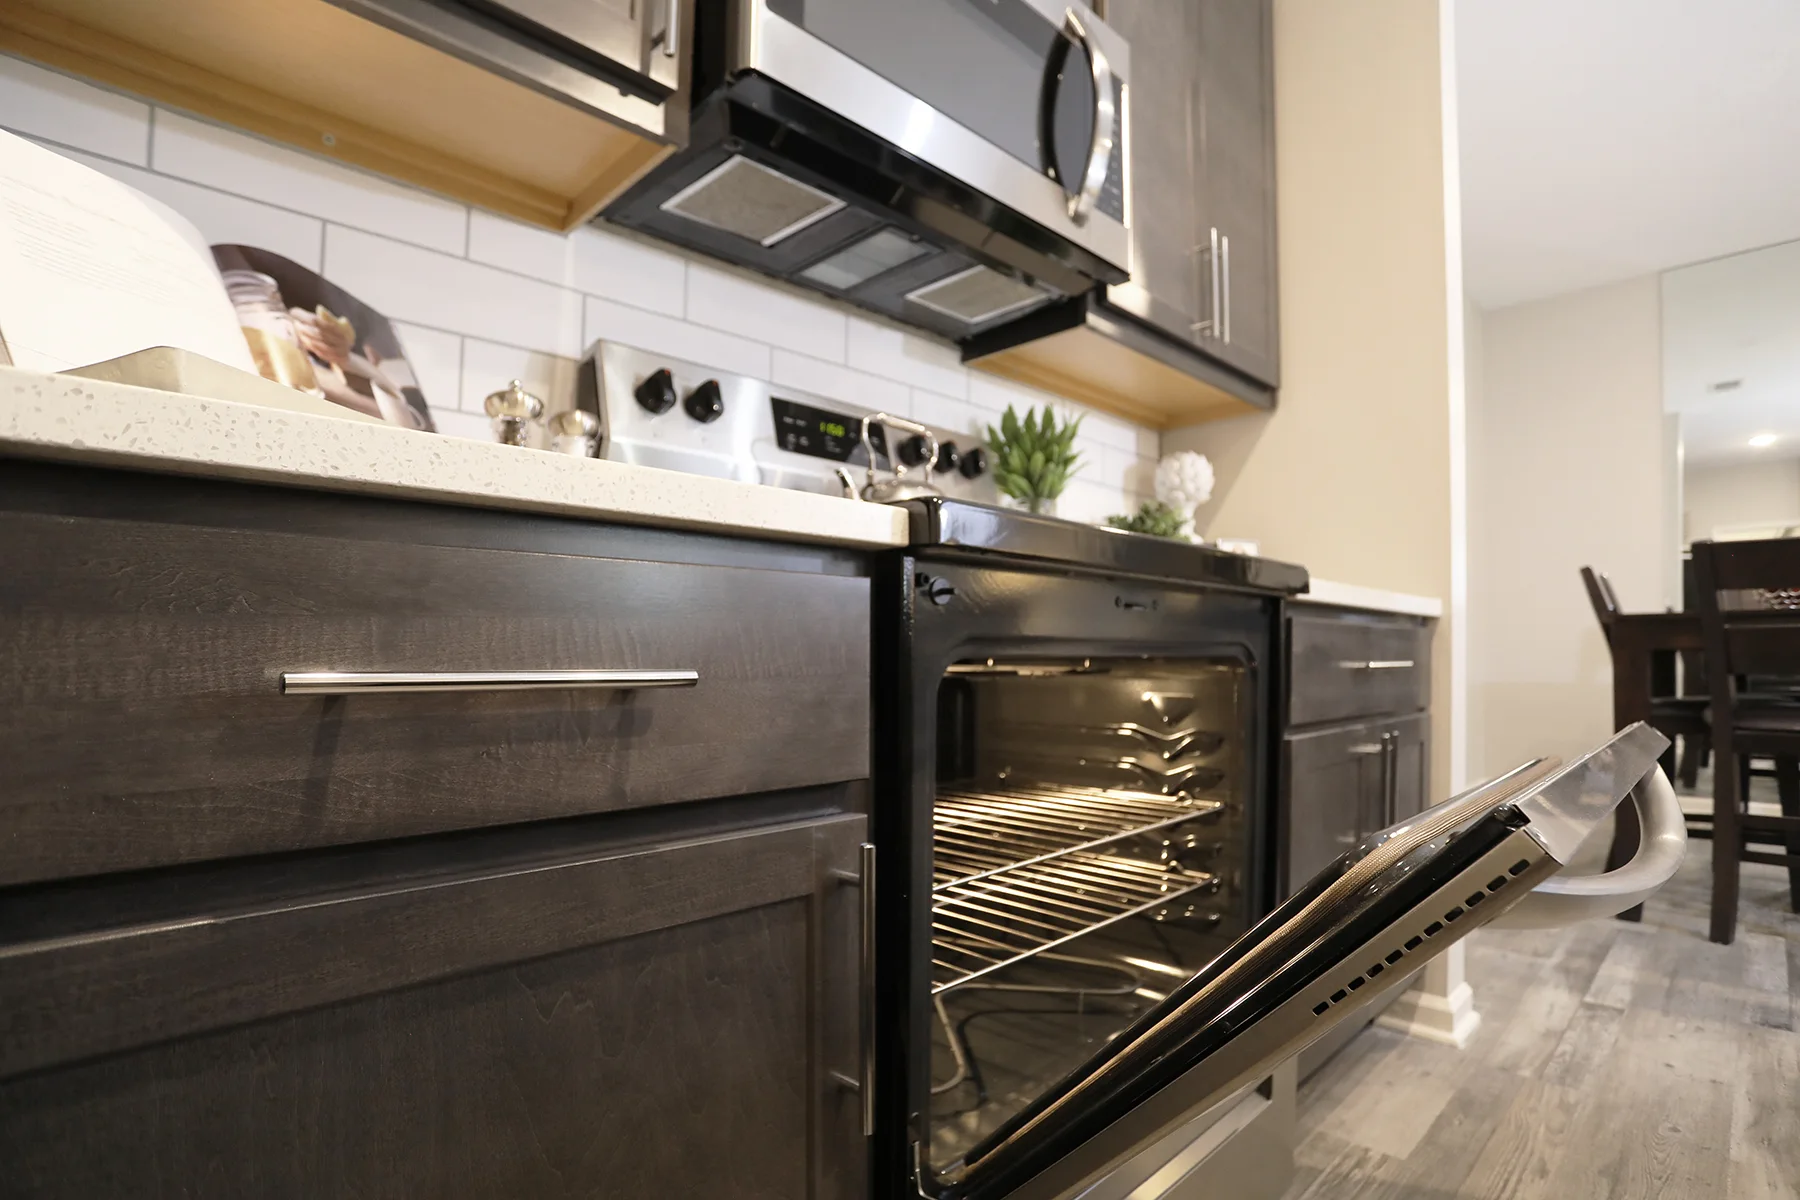 A clean, stainless steel oven slightly ajar sits under a matching, wall-mounted microwave.